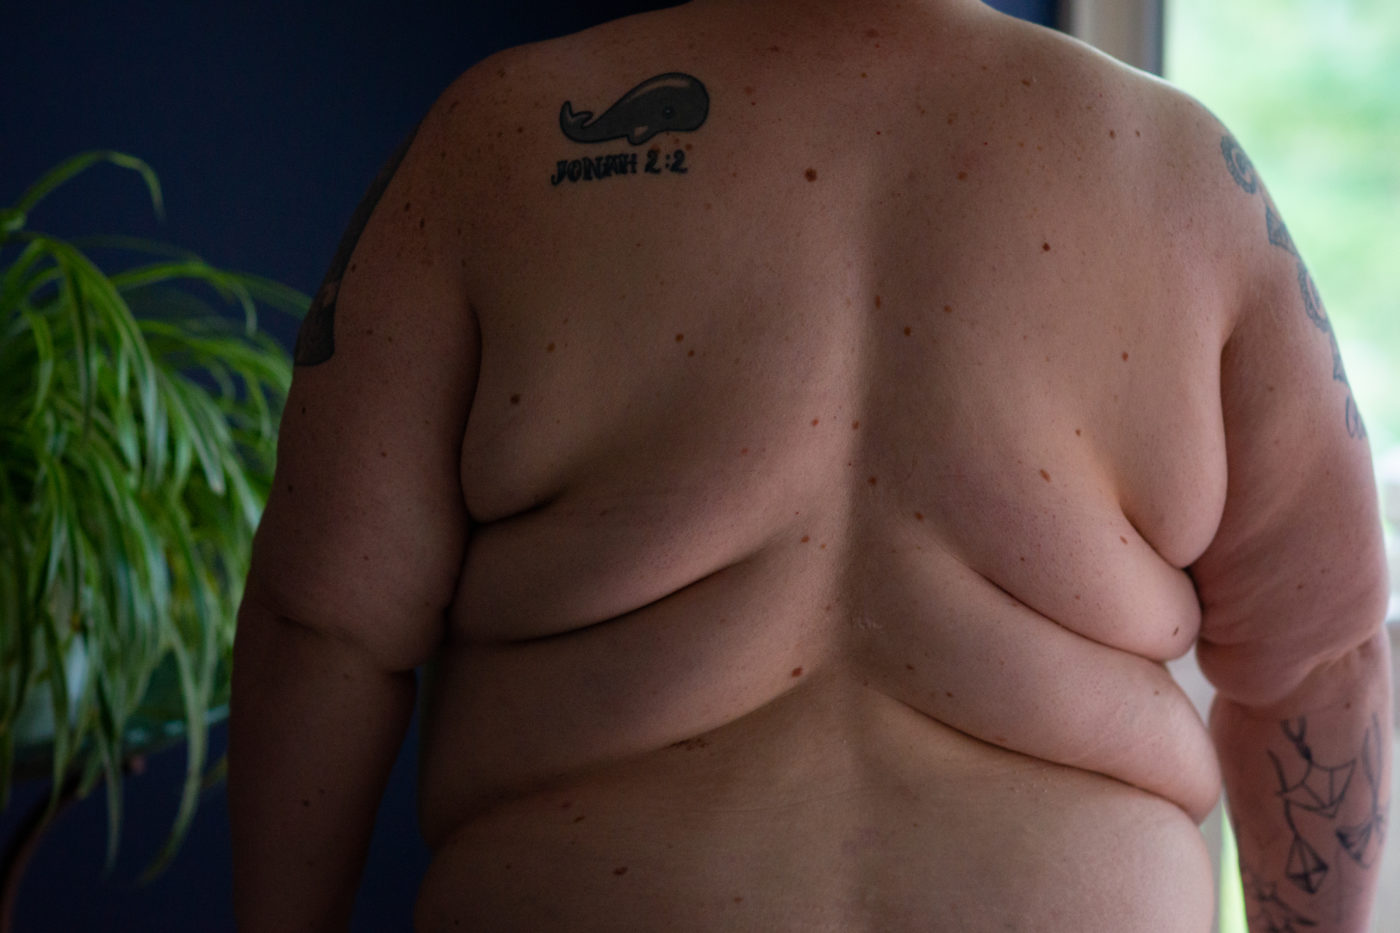 A fat white person's back, back rolls and arms seen in a dark room lit by a window, with a large plant on their other side. On their back is a tattoo of a whale with a Bible verse reference.